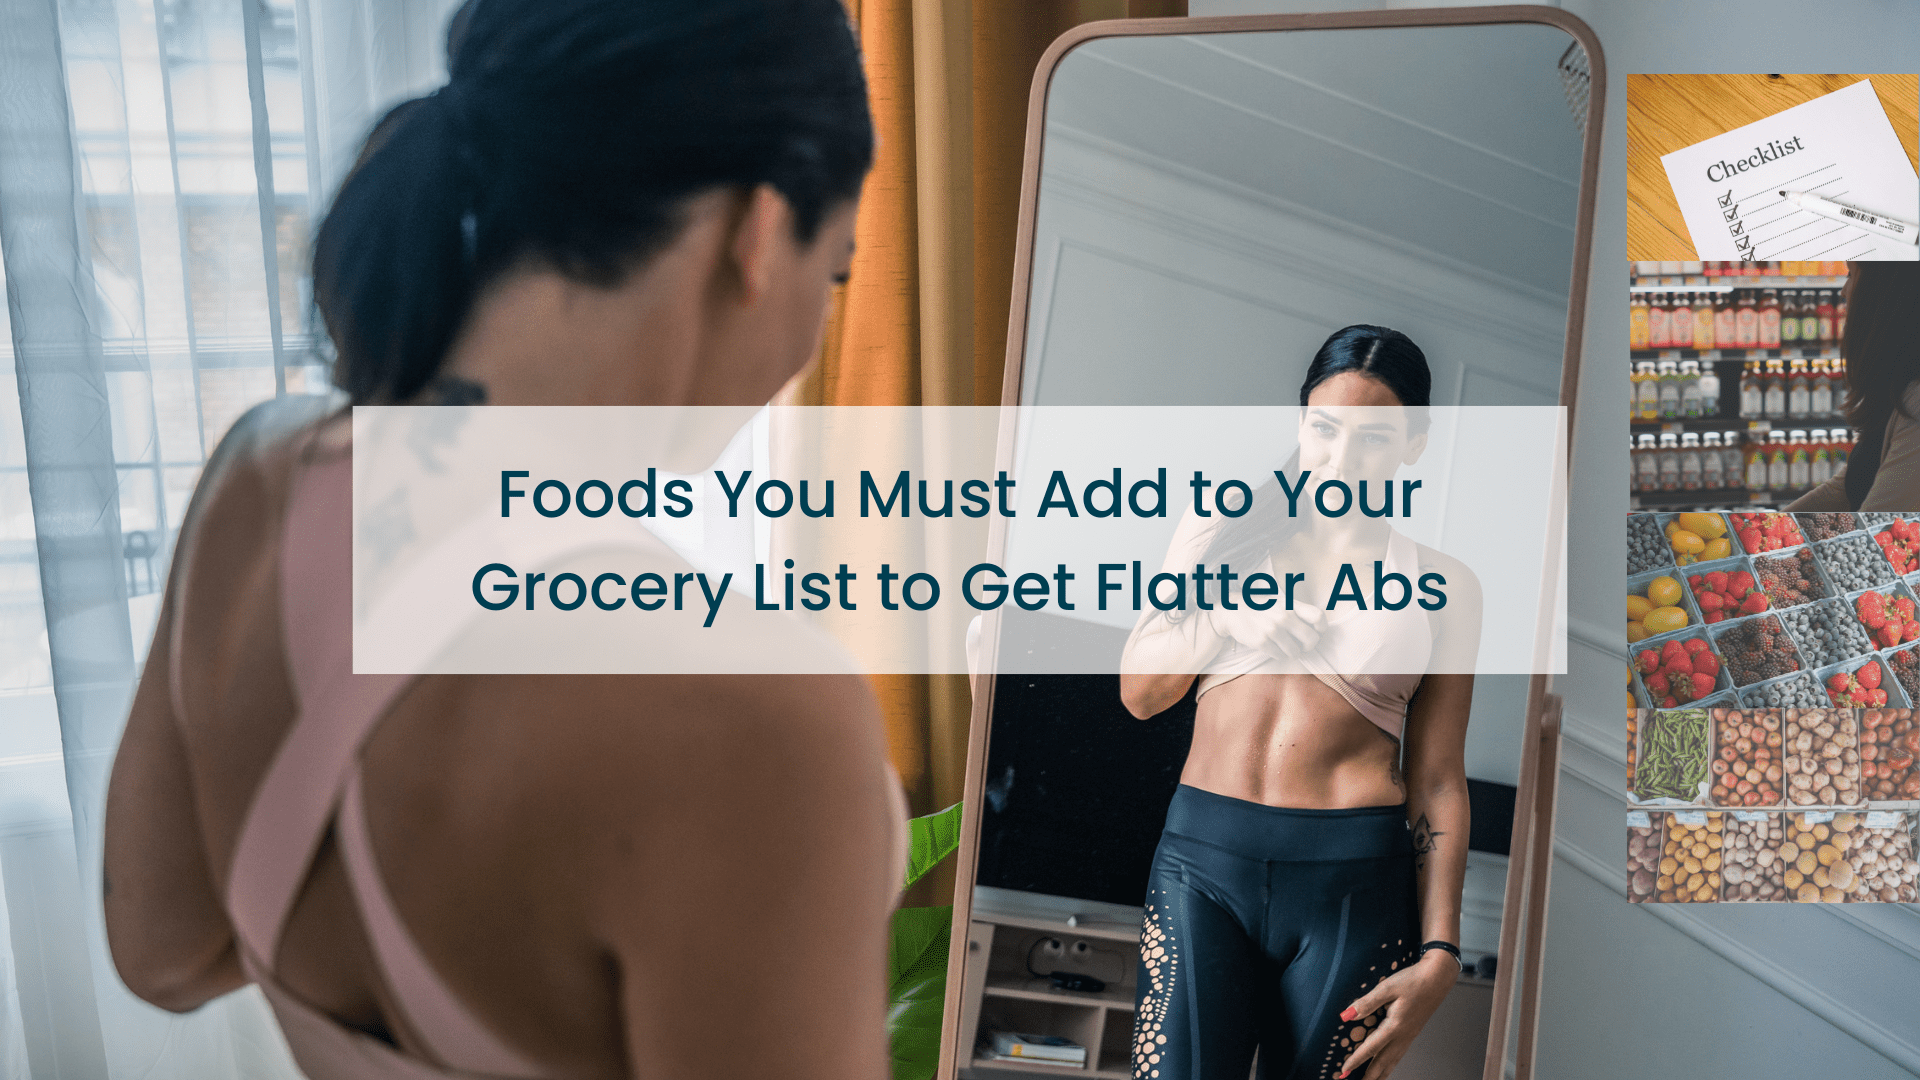 Foods You Must Add to Your Grocery List to Get Flatter Abs